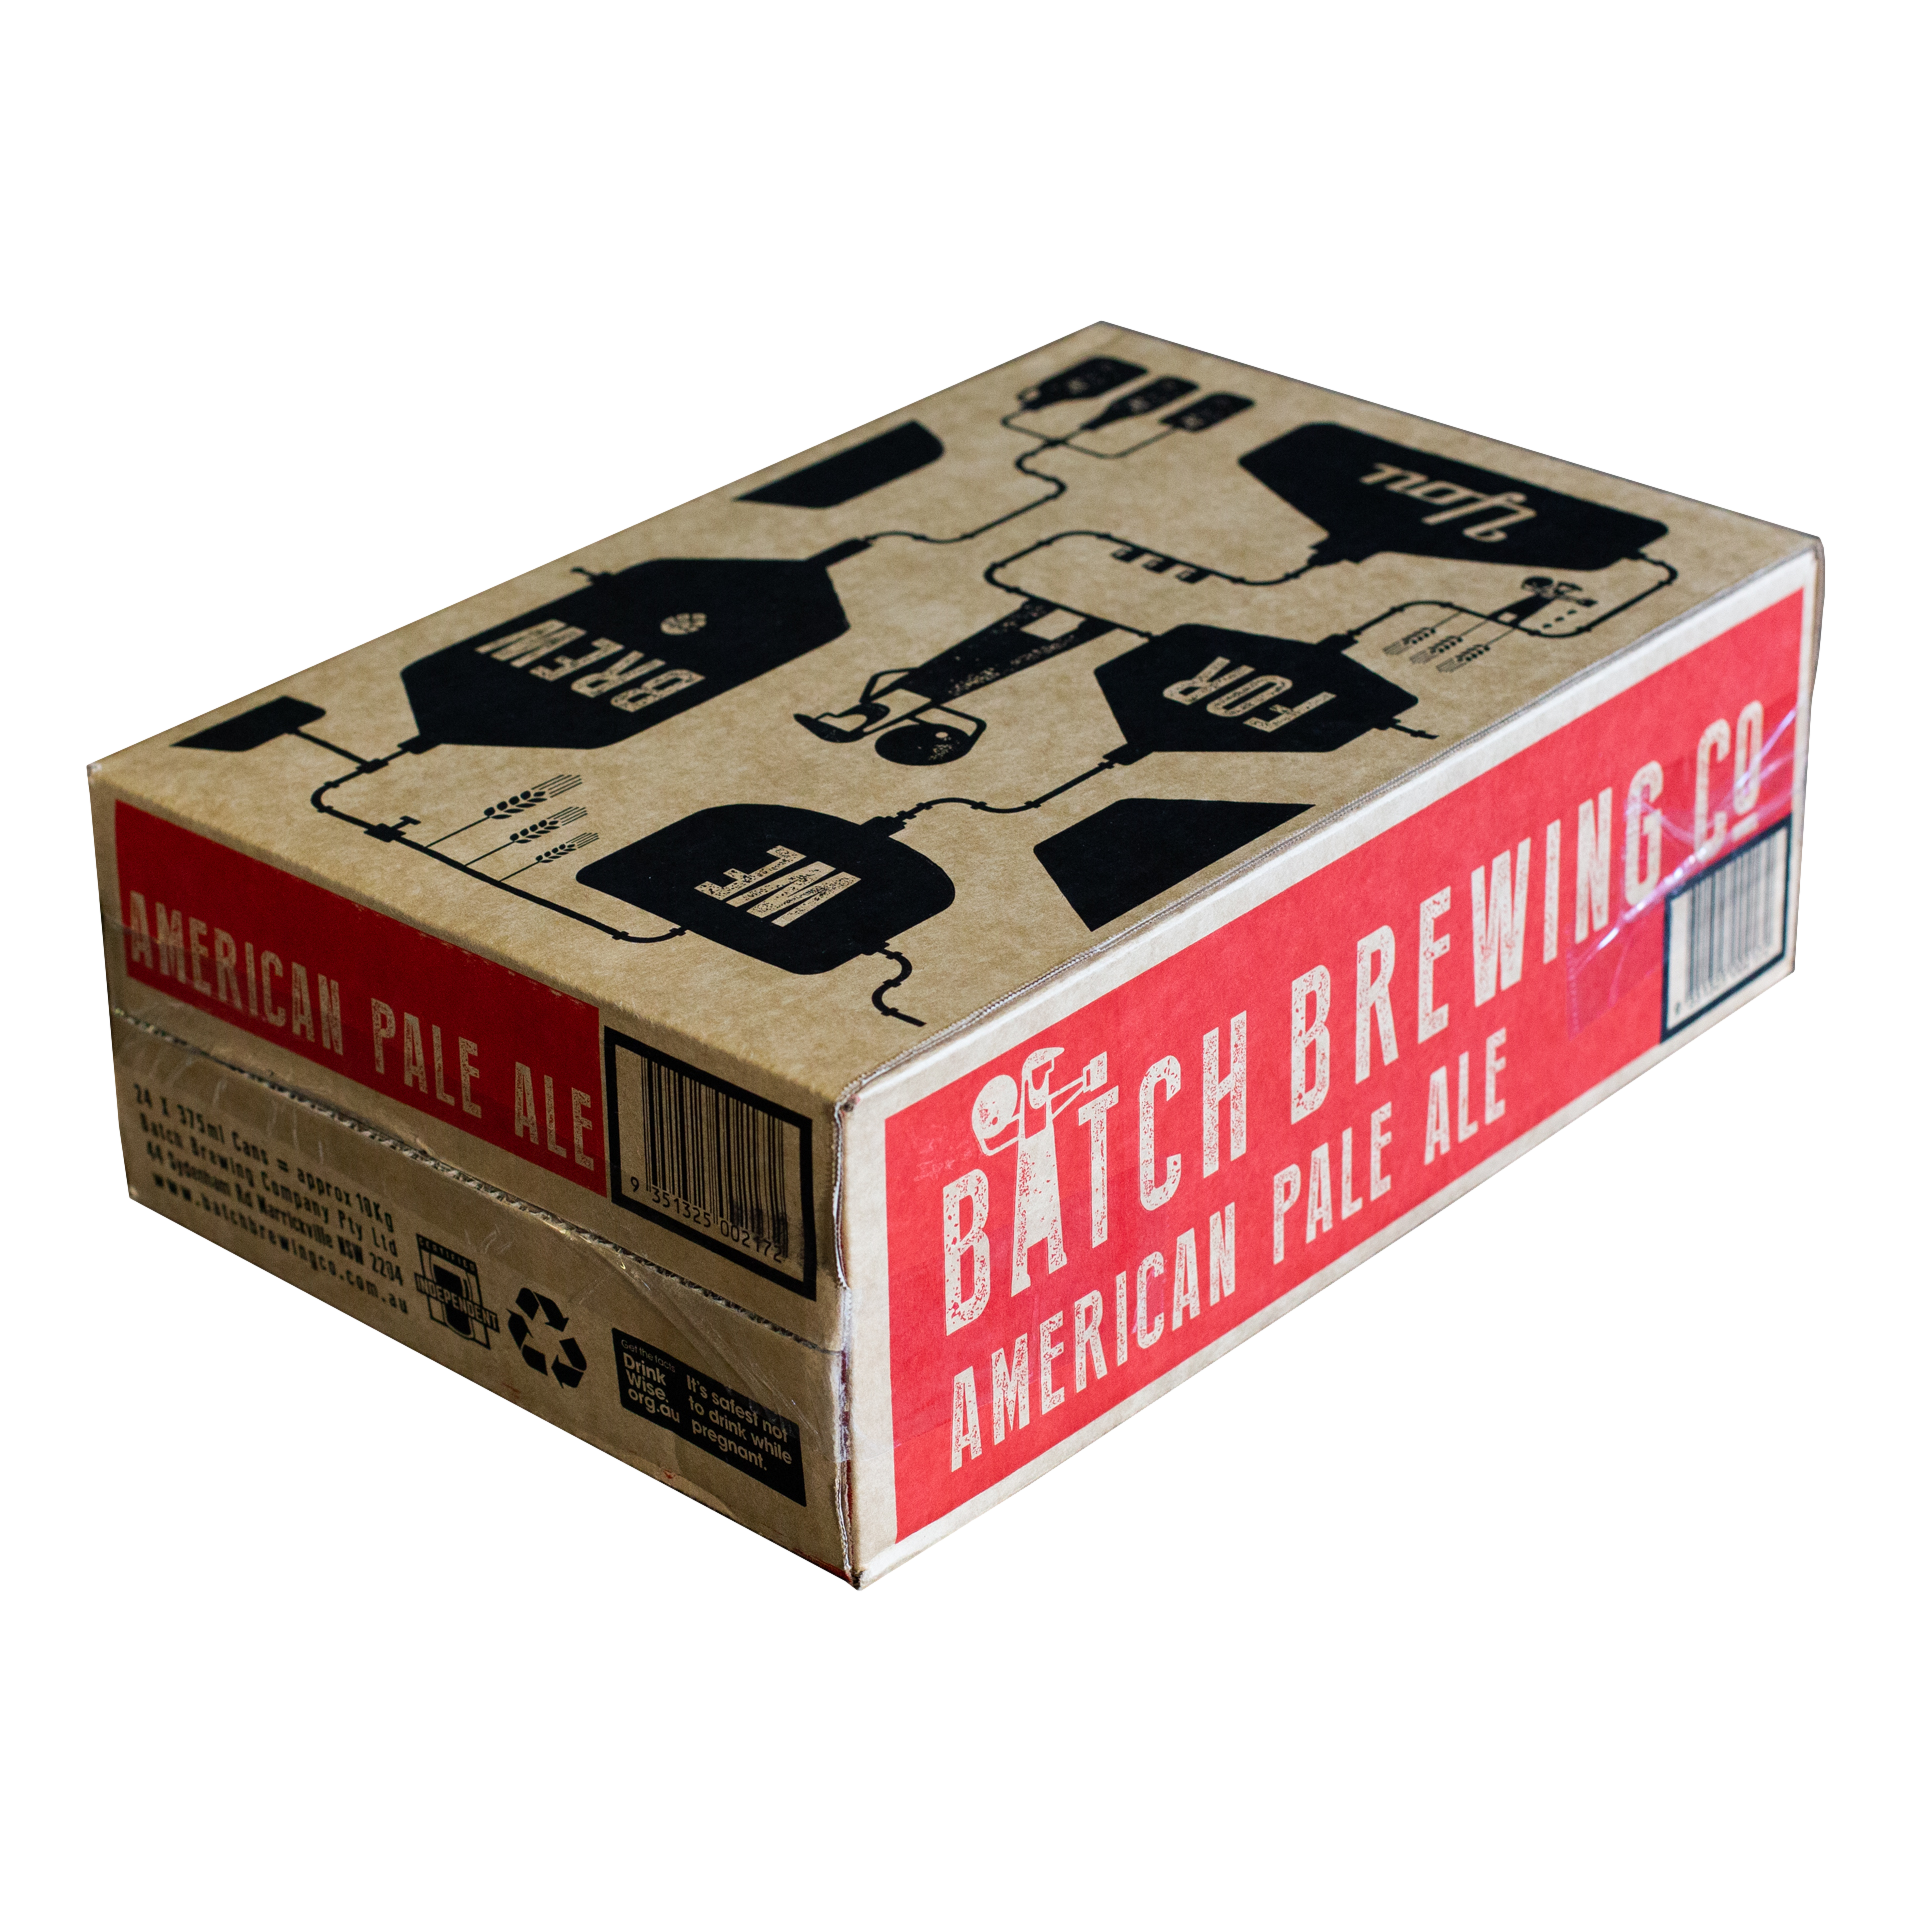 Batch Brewing American Pale 375ml Can Case of 24